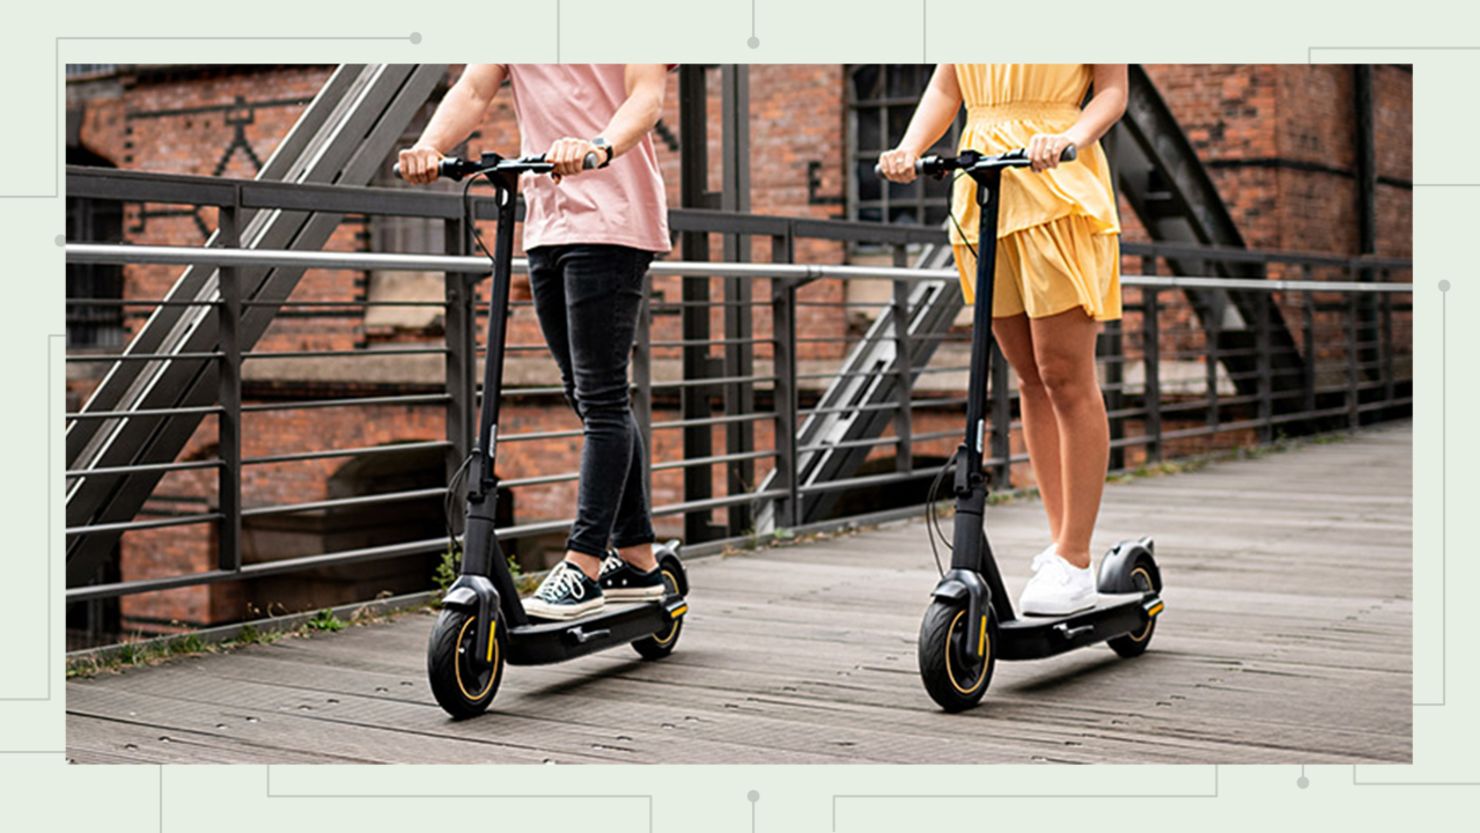 Save 30% on a Segway electric scooter for Cyber Monday